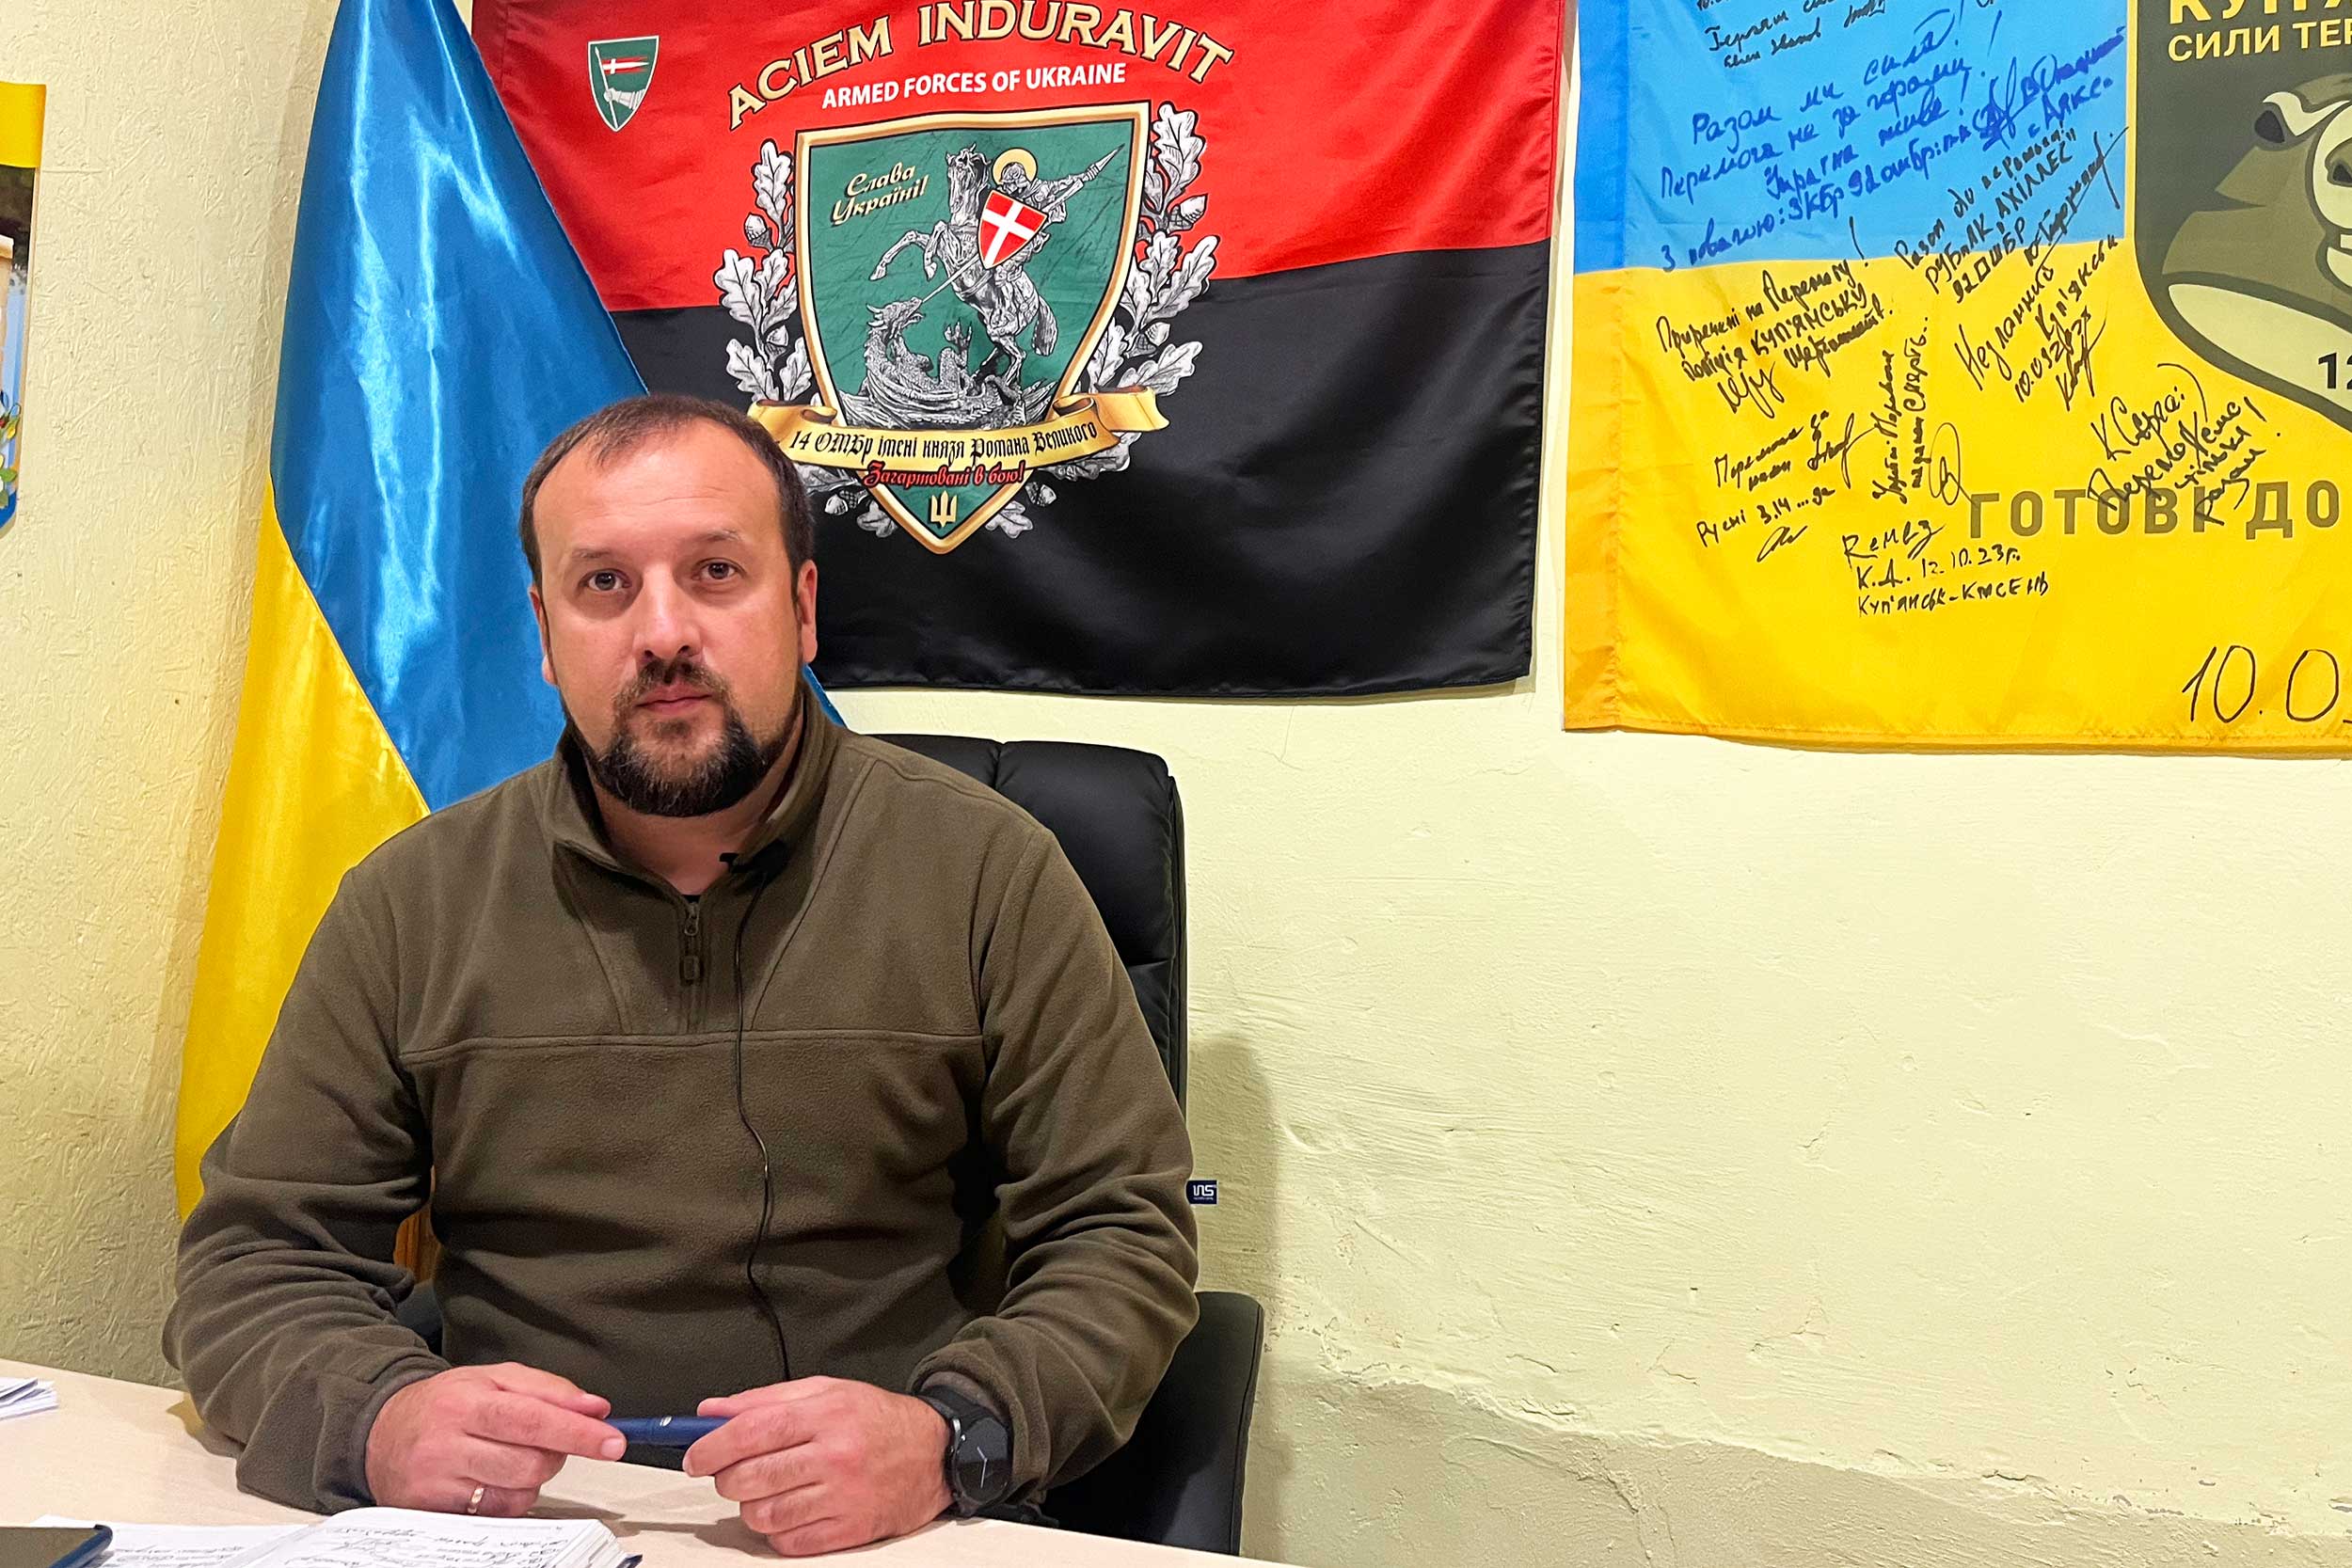 Andrii Besedyn, head of the town’s military administration, with flags commemorating the liberation of Kupiansk. Russian attacks are increasing, and the population is evacuating. © IWPR